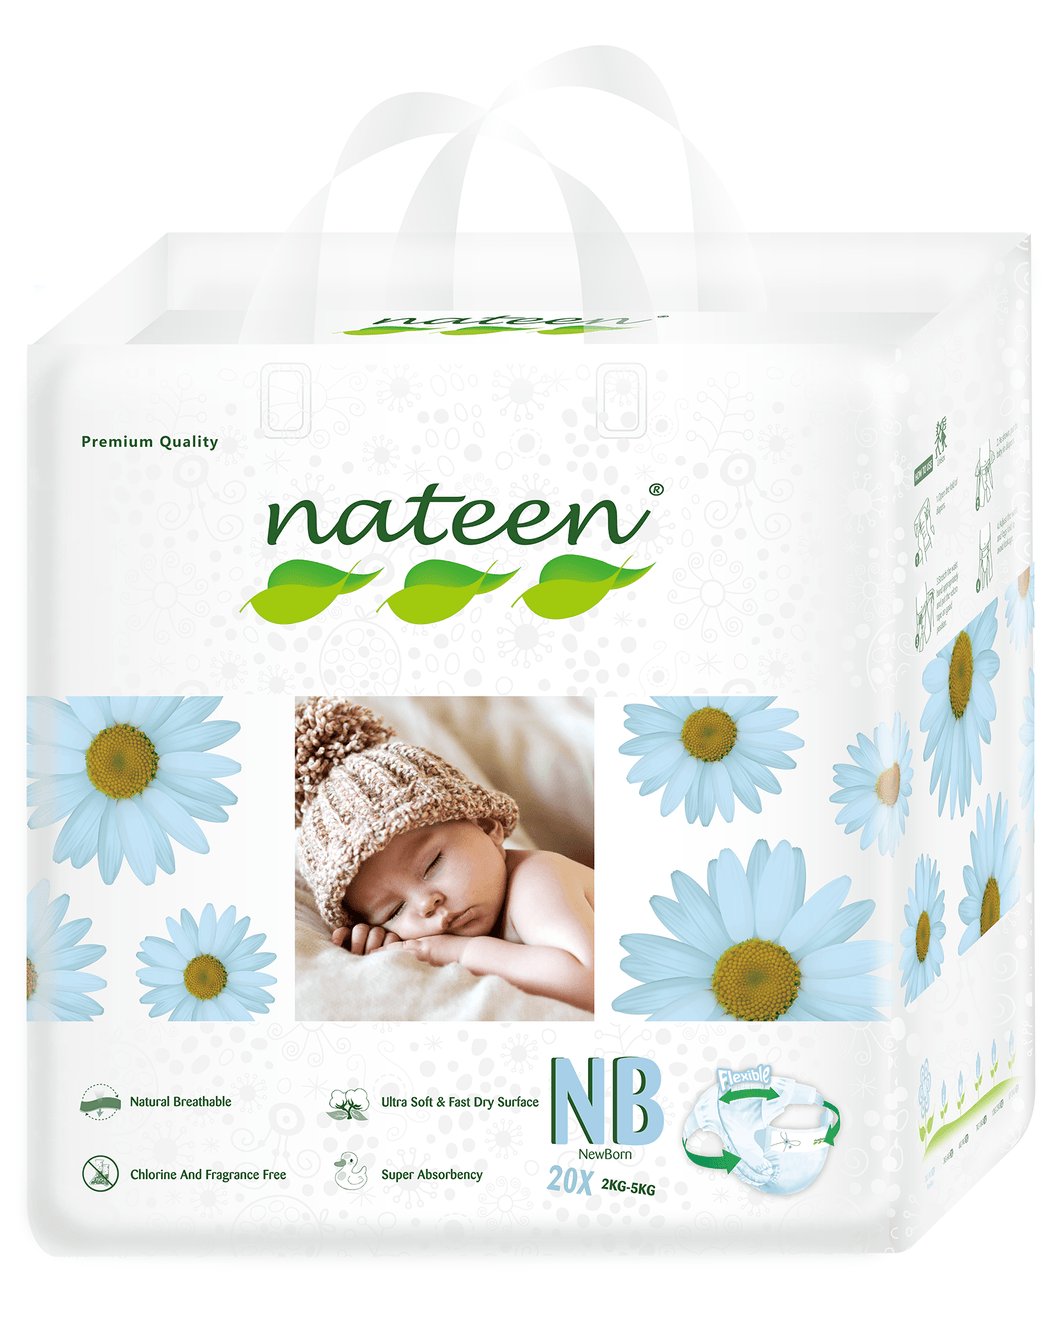 baby wipes nateen canada premium diapers biodegradable sustainable ecoliving ecofriendly toronto vancouver montreal newborn